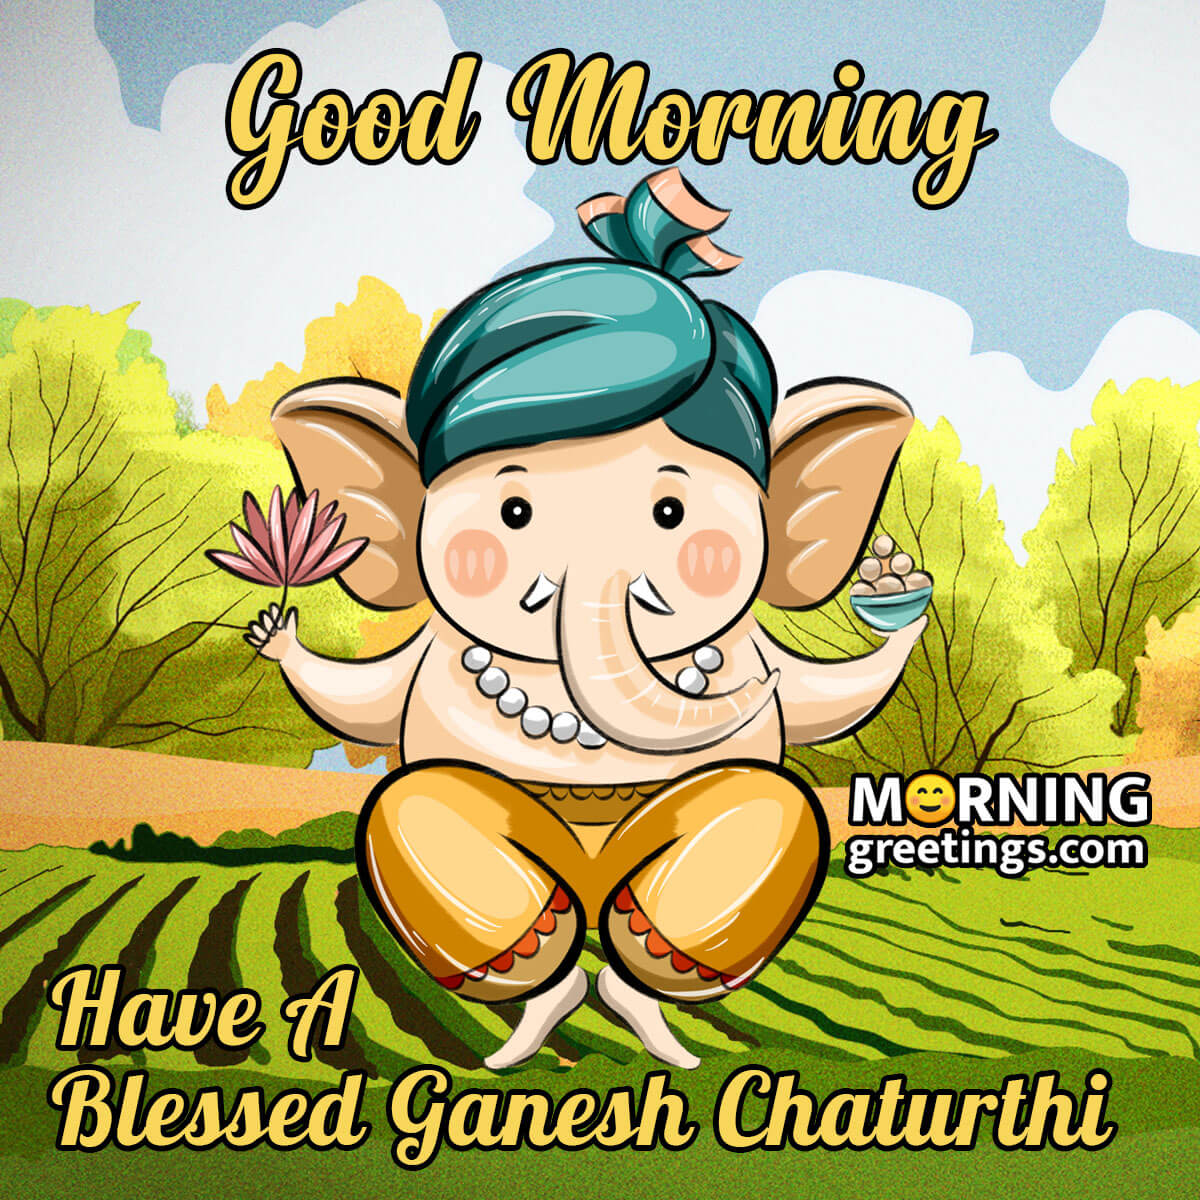 Good Morning Have A Blessed Ganesh Chaturthi